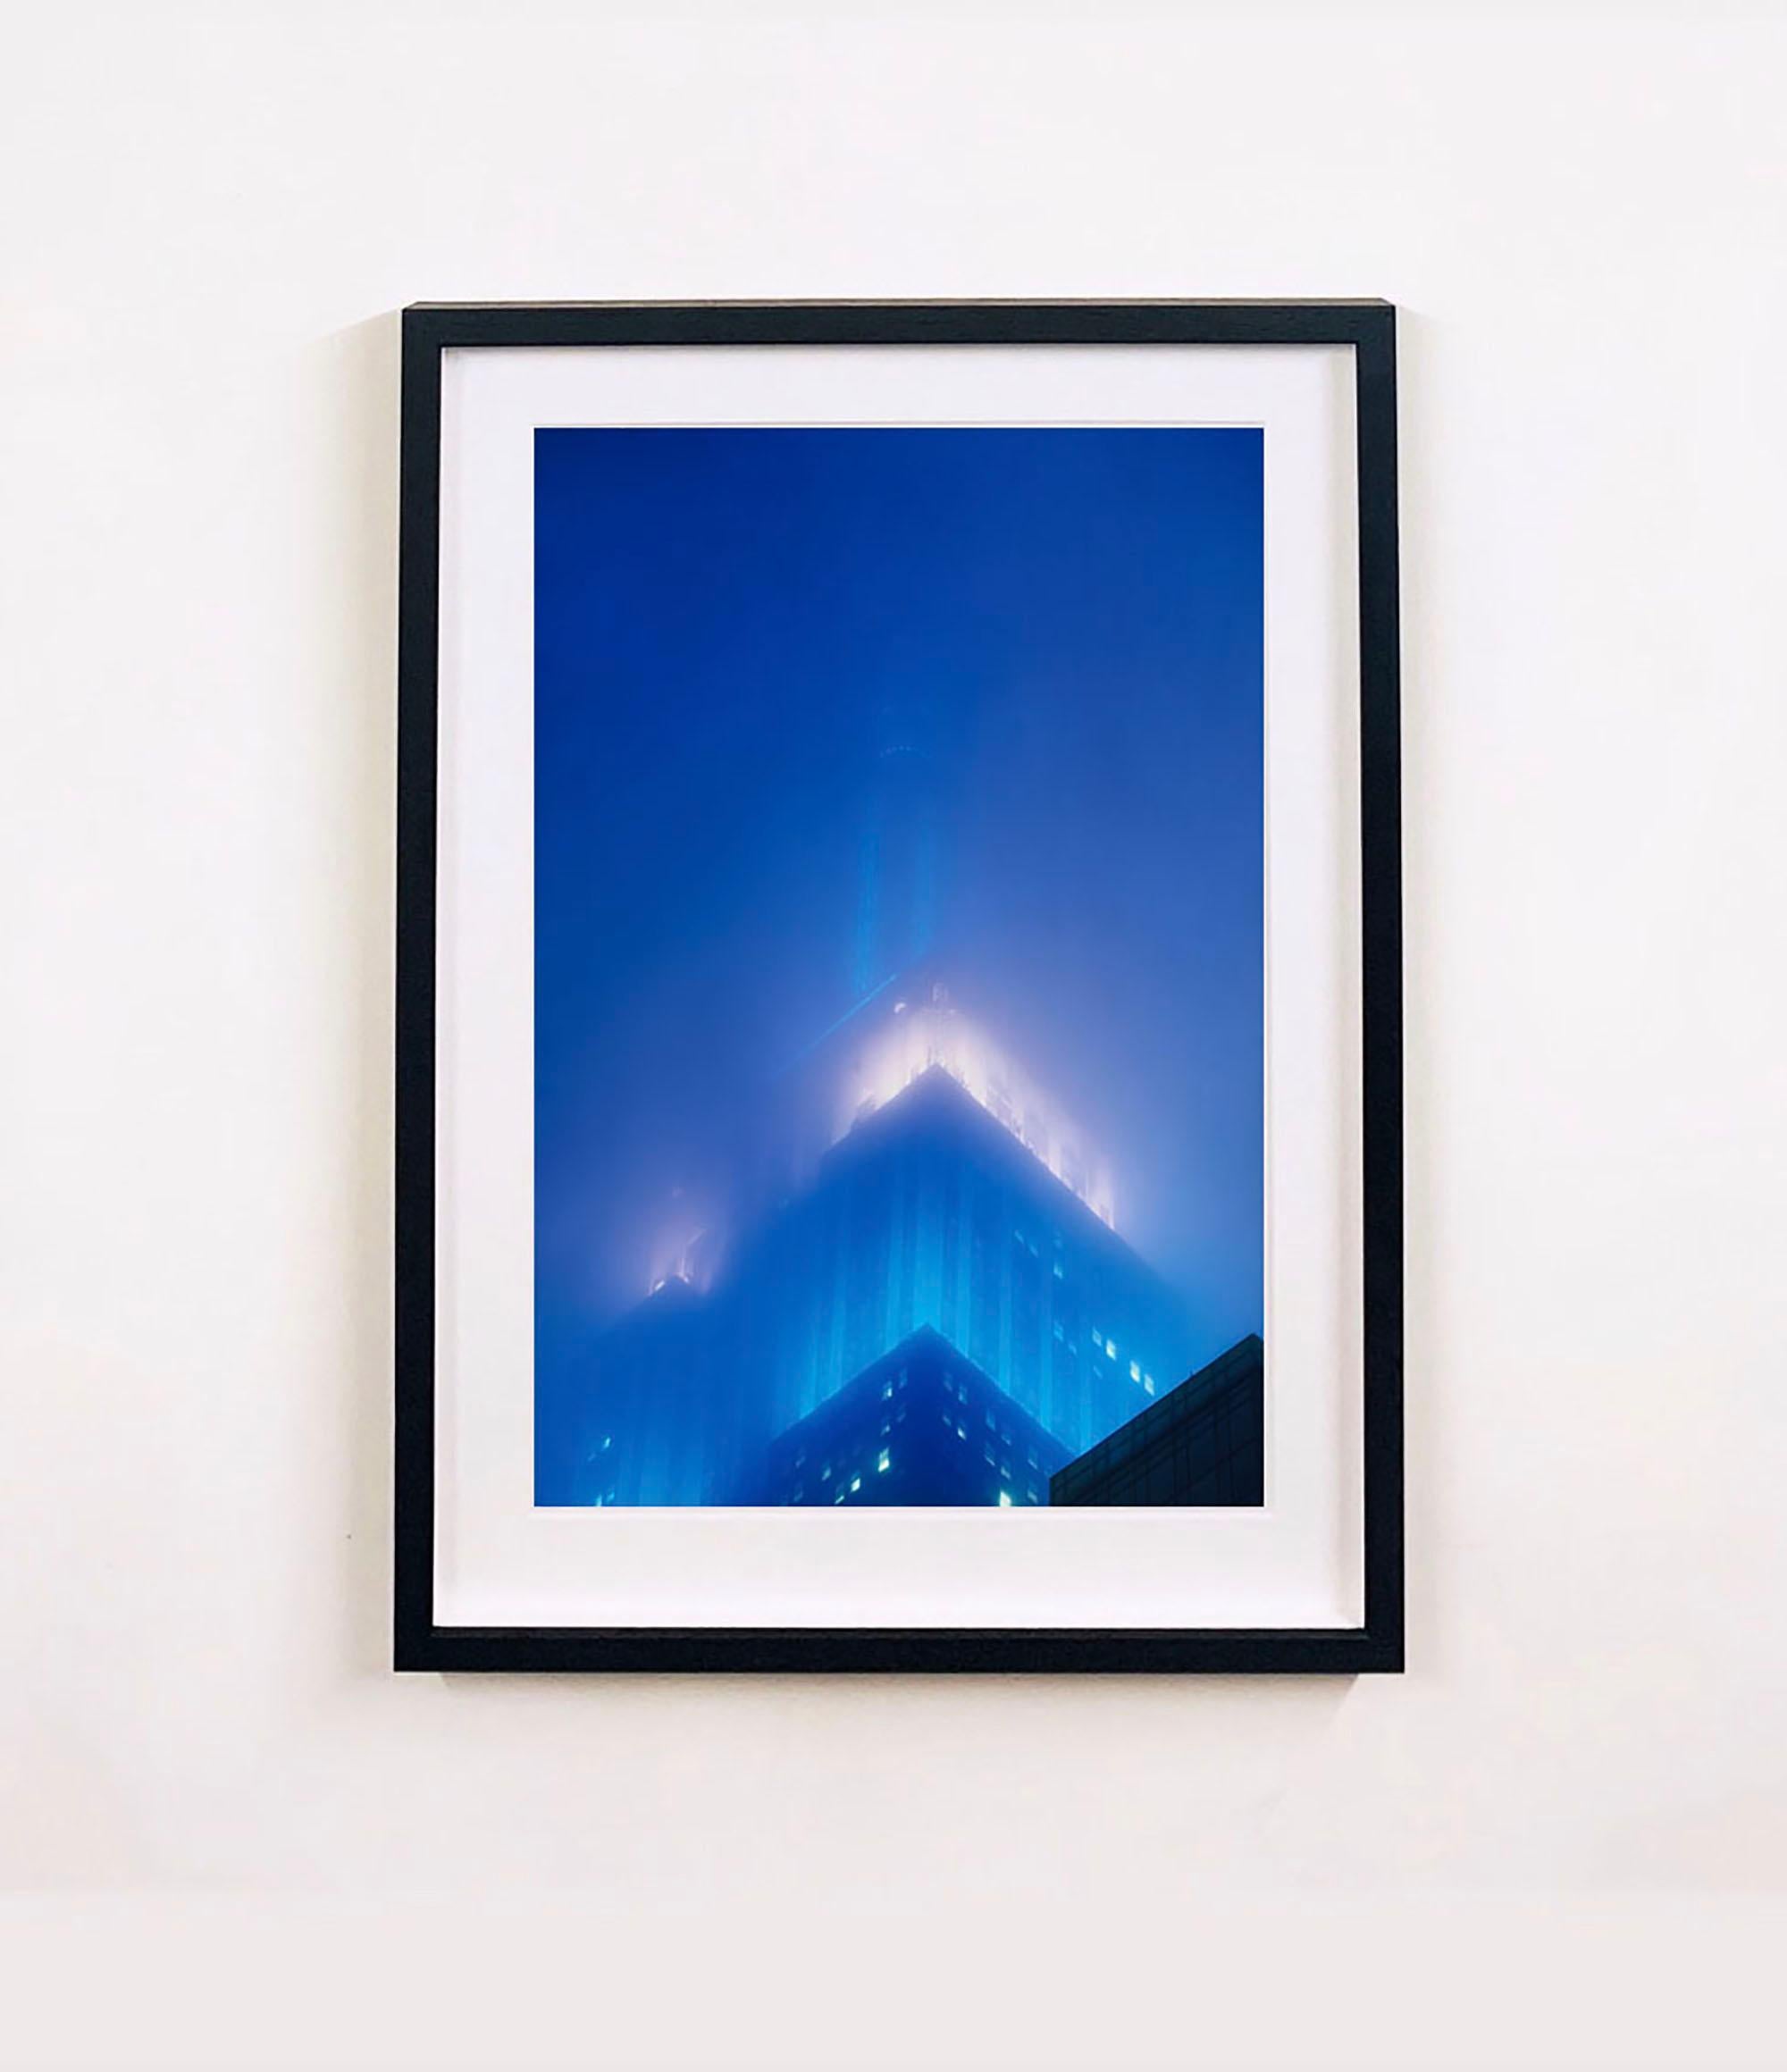 'Nomad, New York', artwork by Richard Heeps featuring a time-lapse of the iconic art deco Empire State building in the mist. Photographed in New York City in 2017, he executed this in his darkroom later, printing it in February 2019
This artwork is